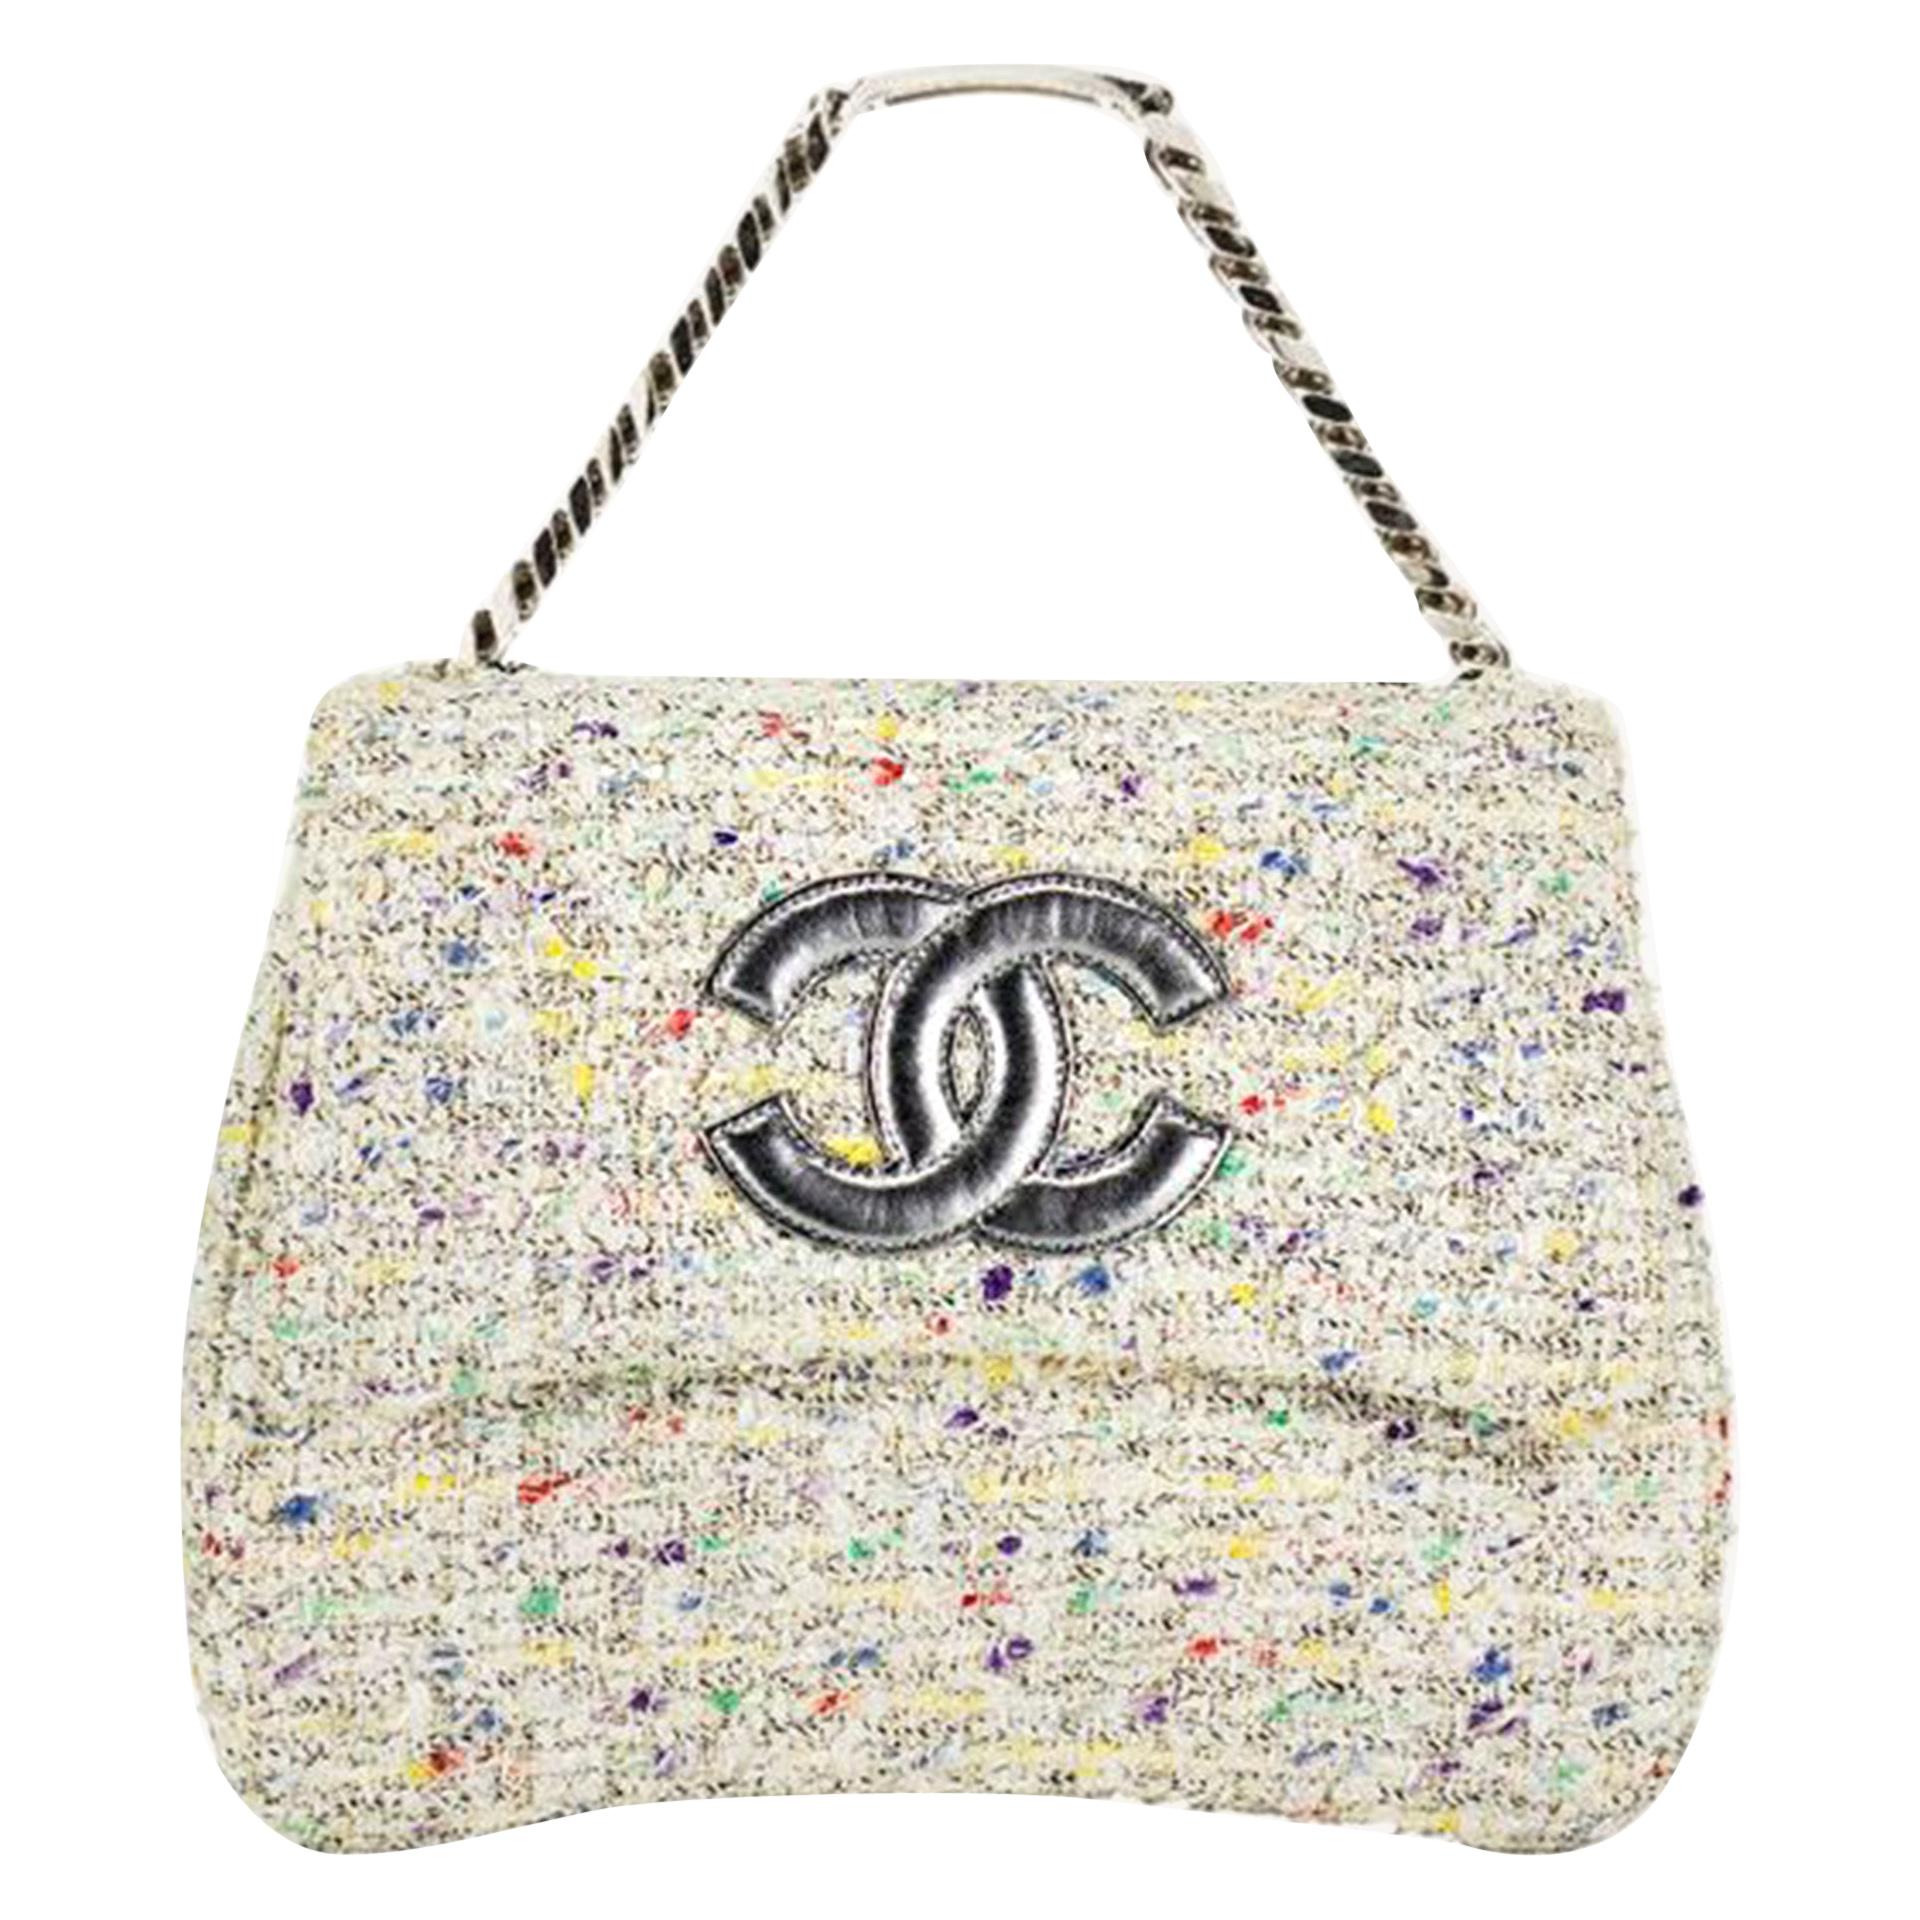 Chanel Bag with Top Handle Classic Flap Vintage Logo Nameplate Tweed Clutch